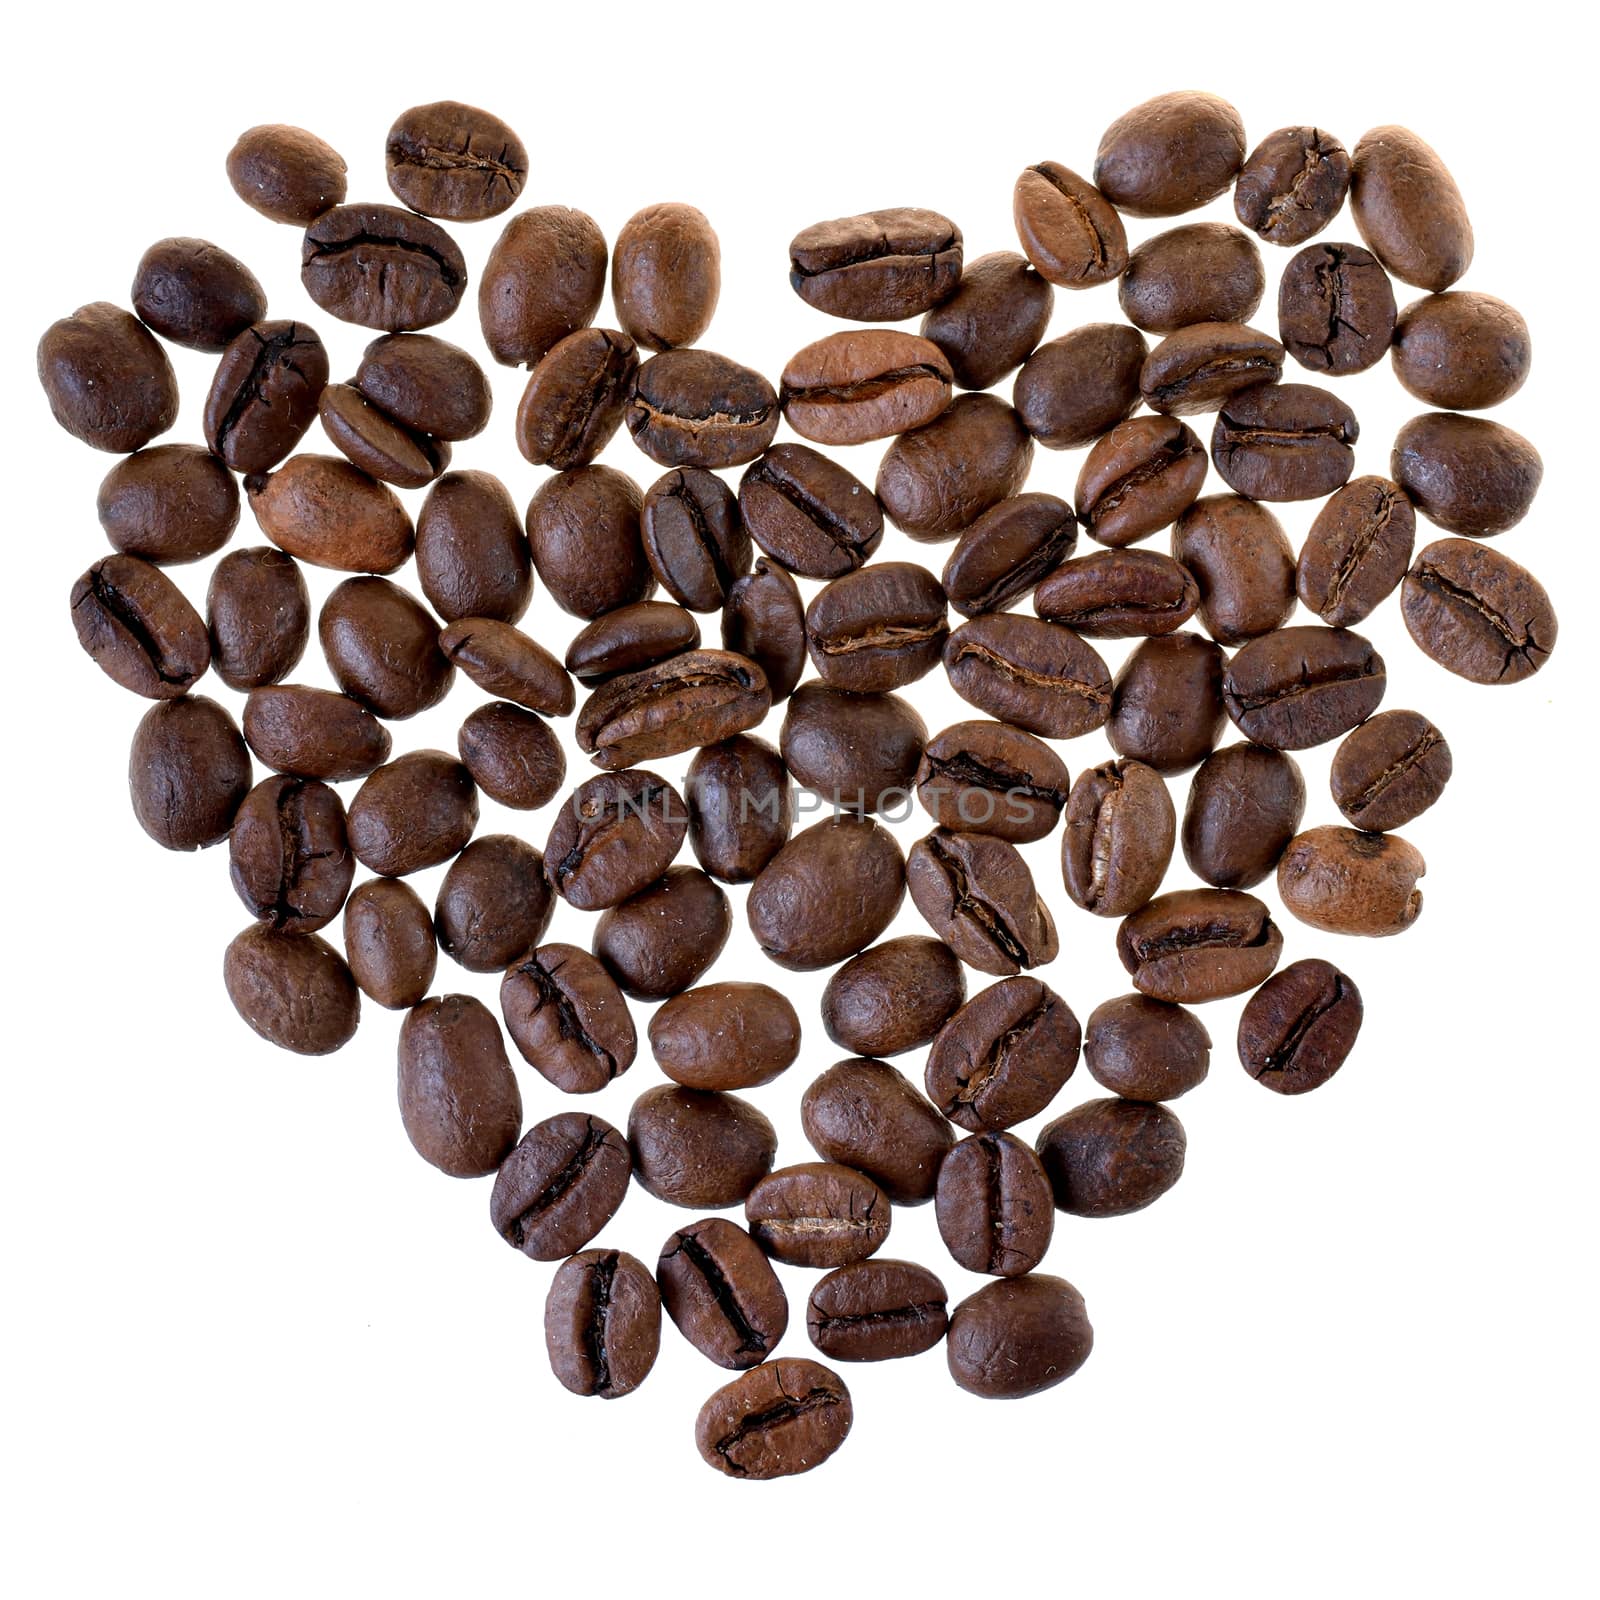 Heart made from coffee beans isolated on a white background.